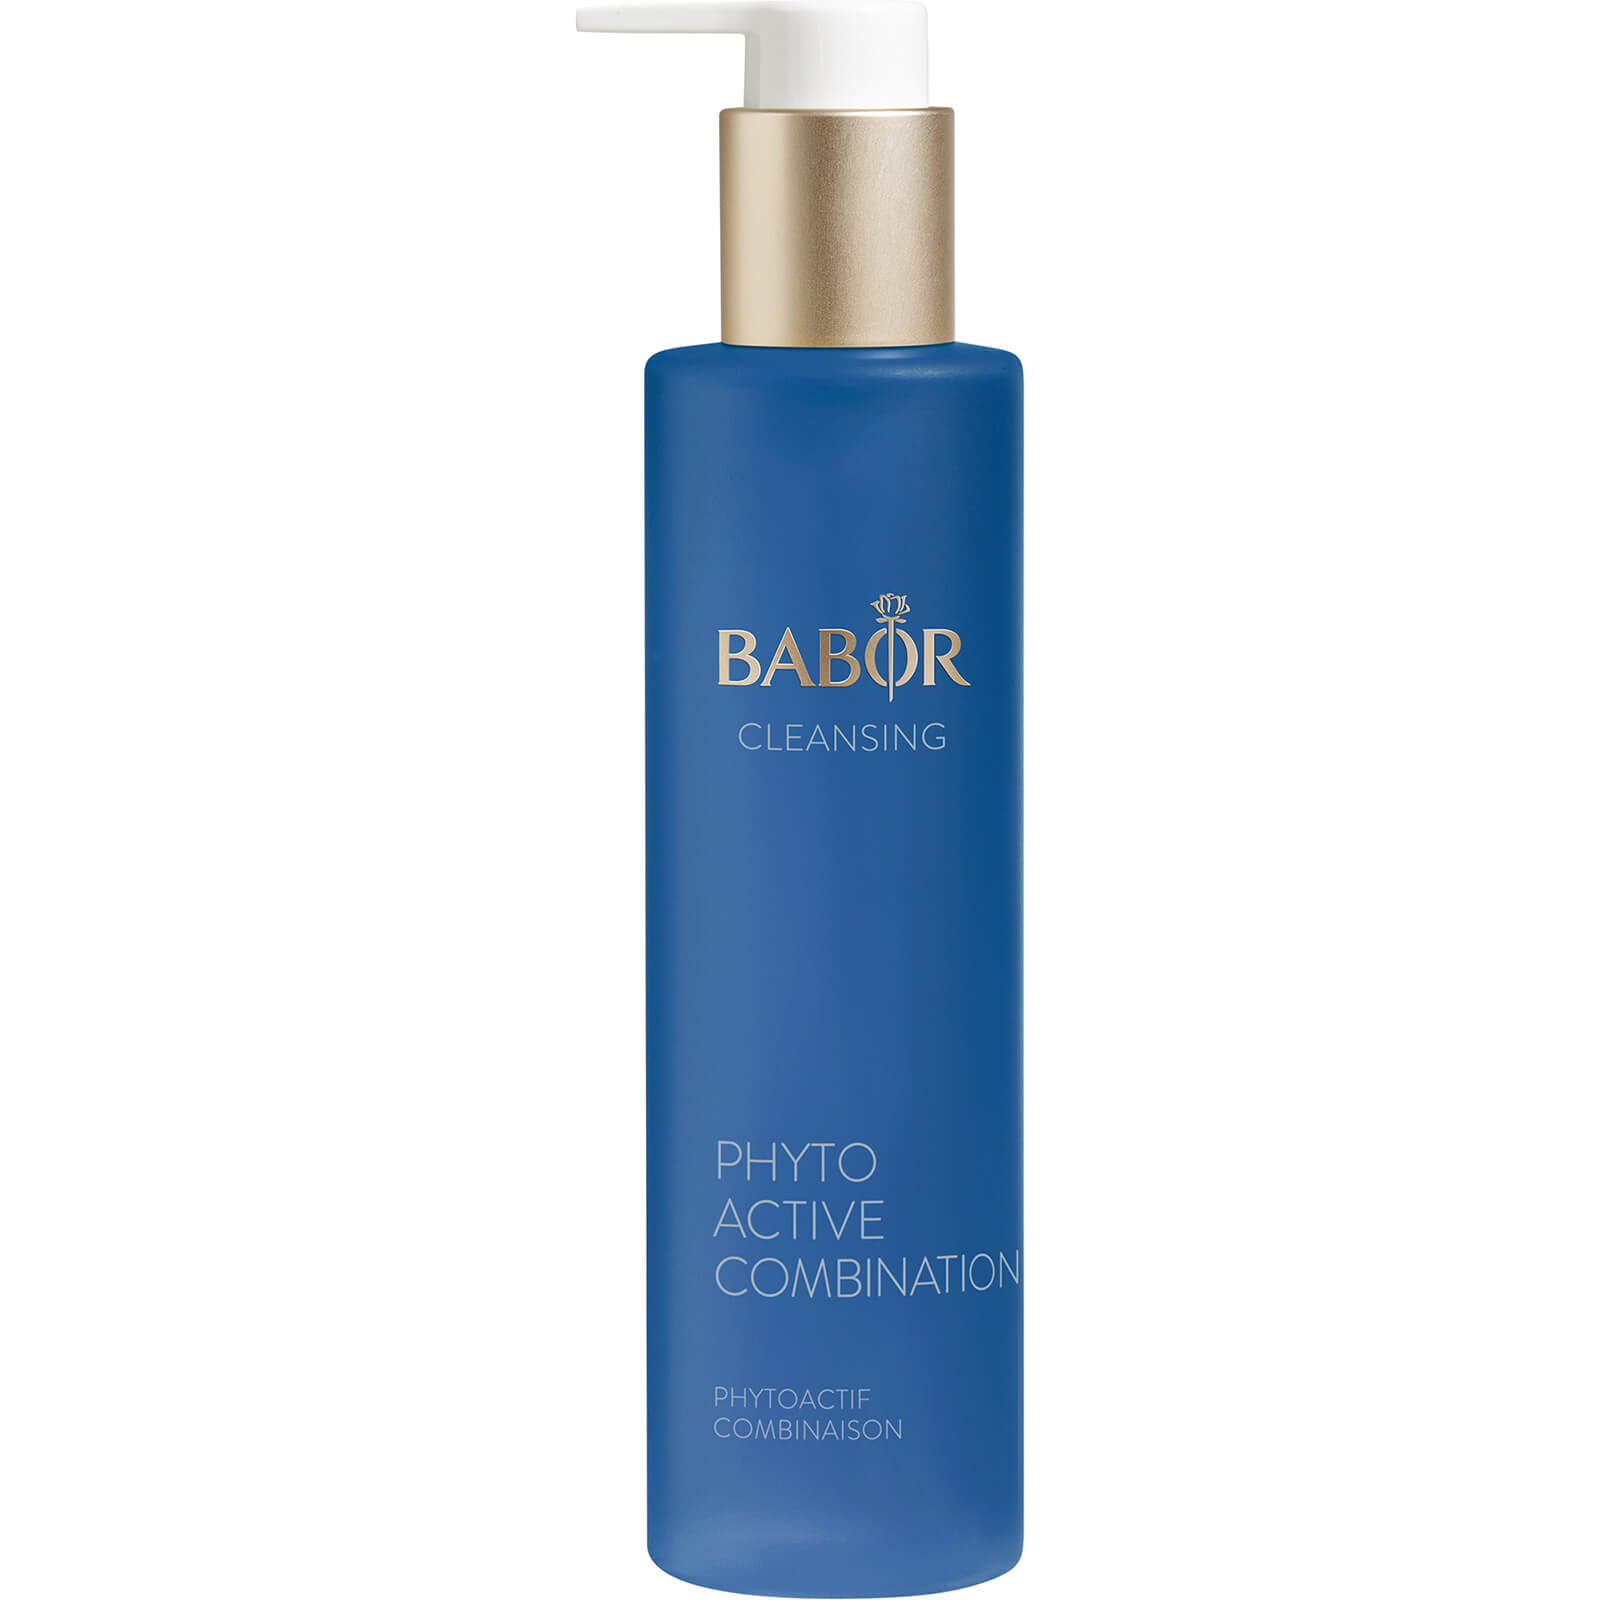 BABOR Cleansing Phytoactive – Combination 100ml lookfantastic.com imagine